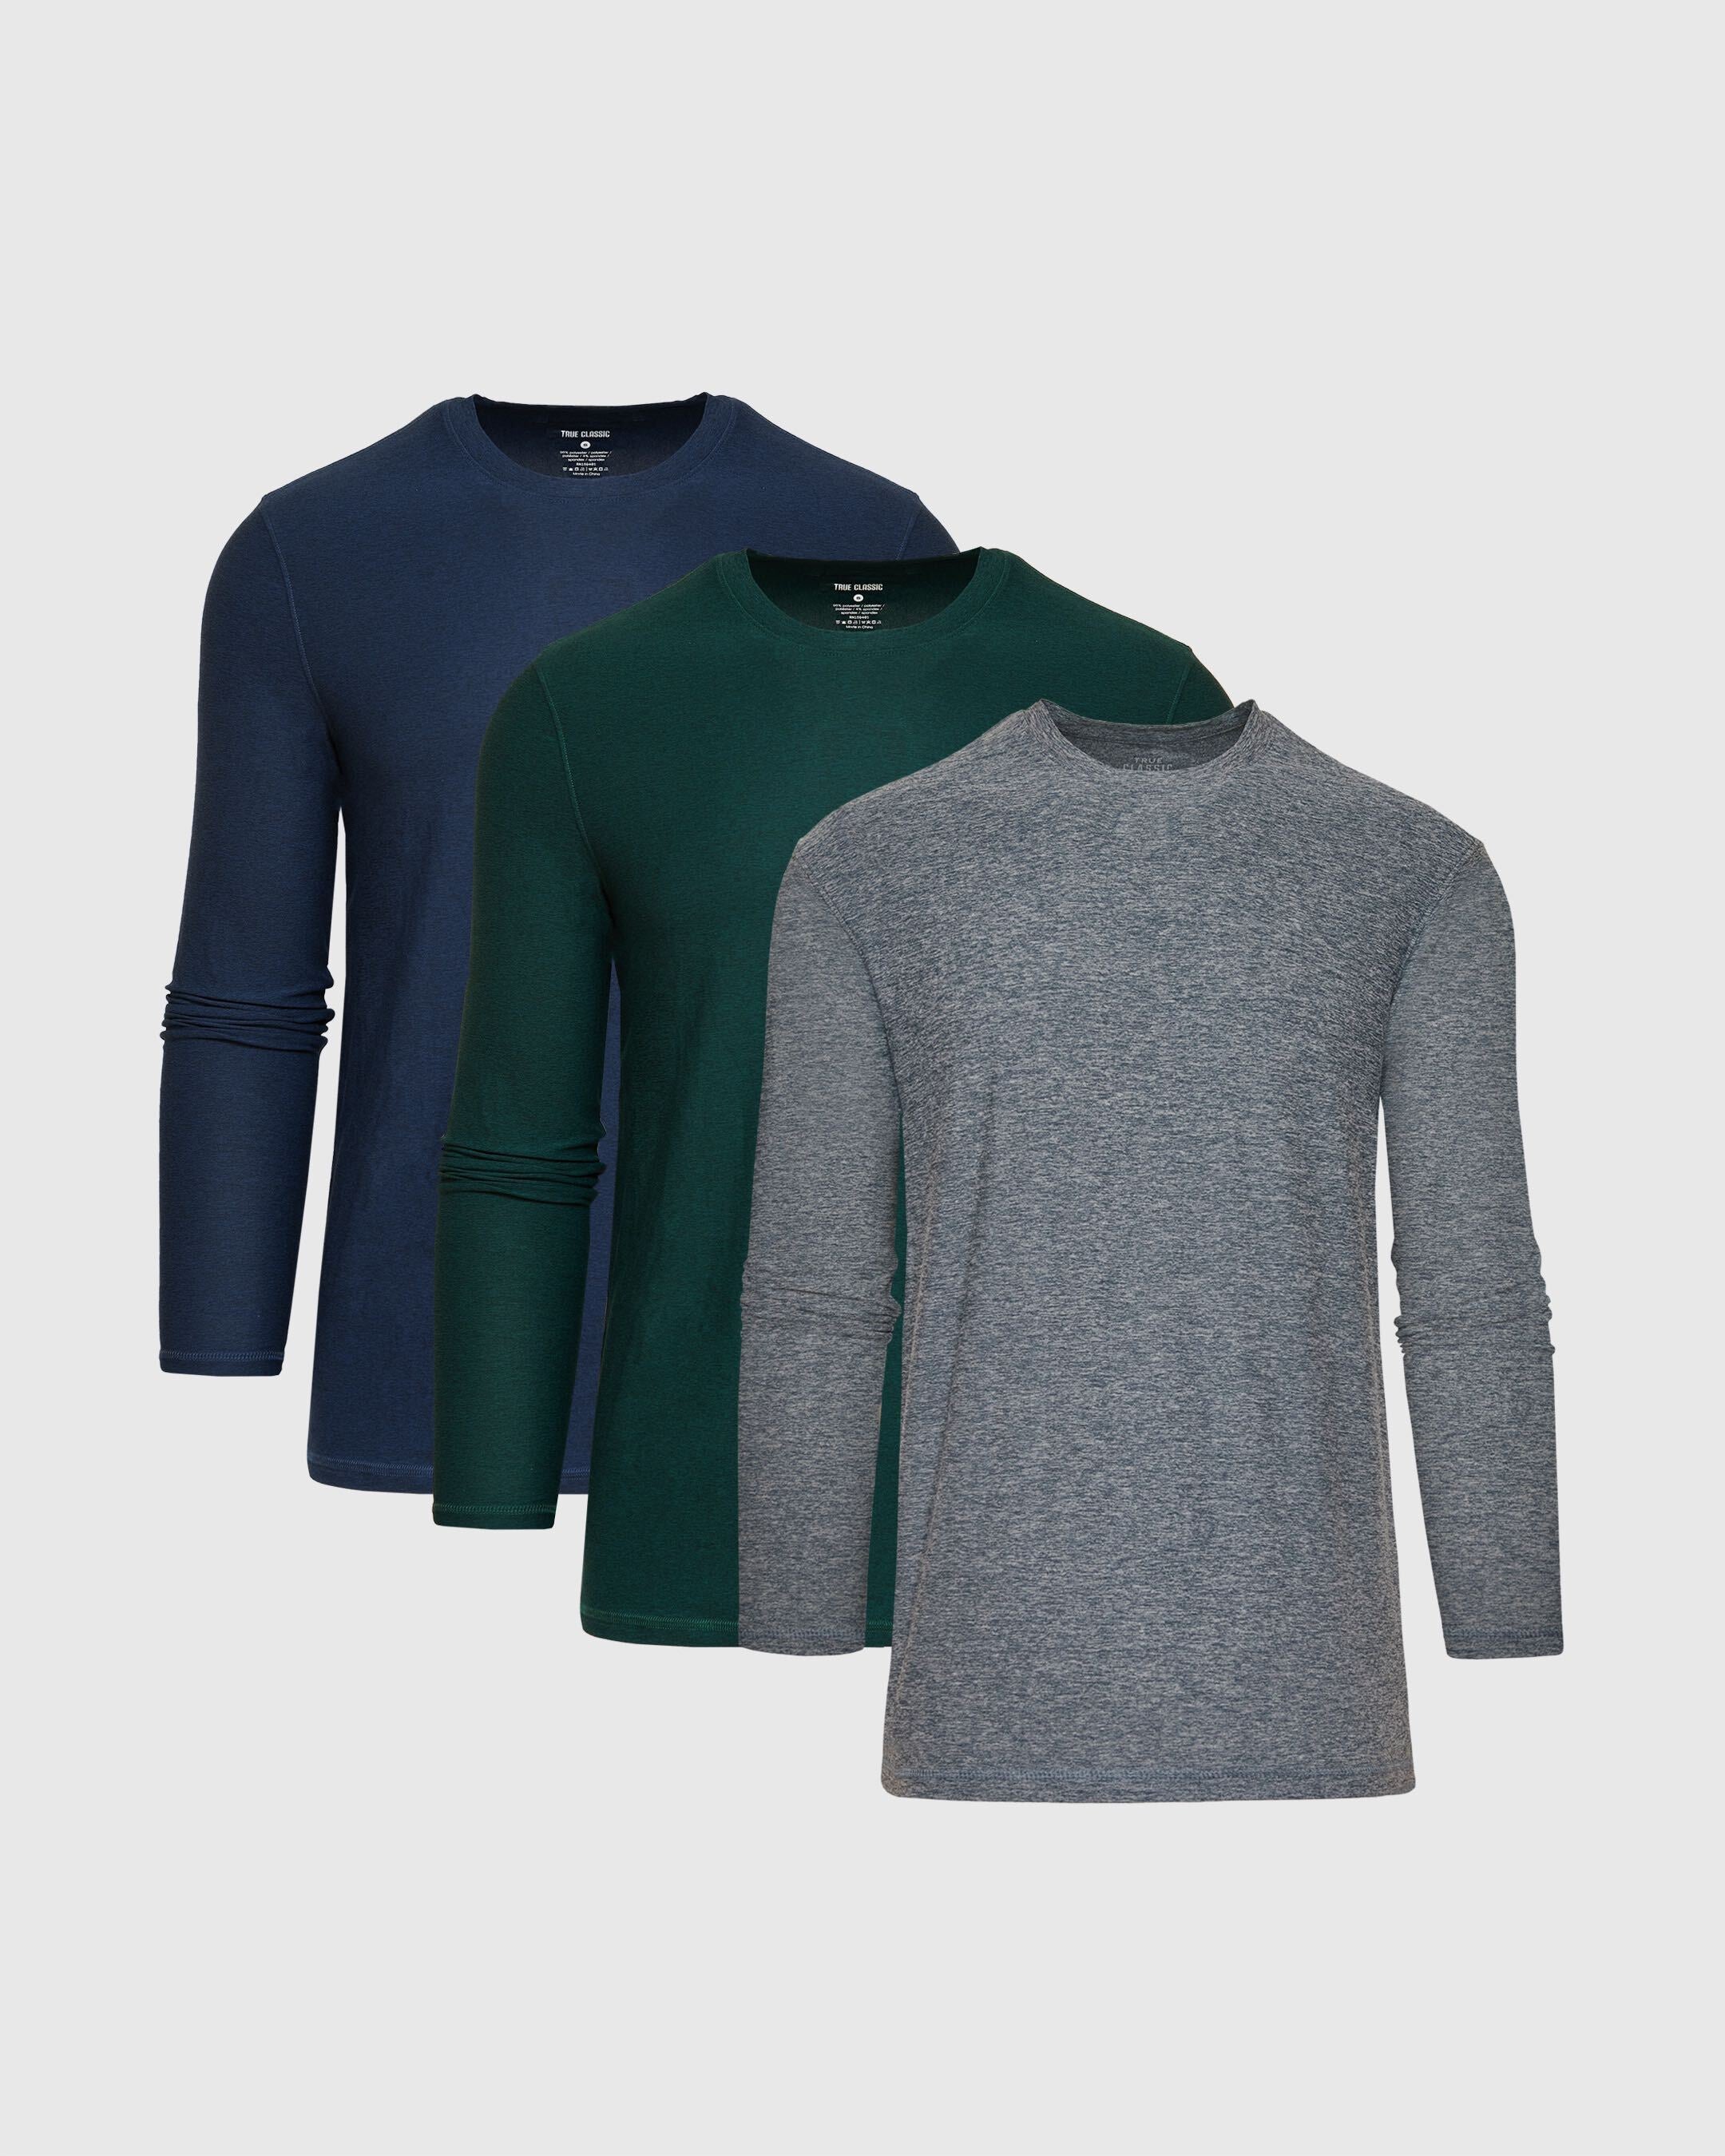 True Classic Multicolor Cool Tones Active Long Sleeve T-Shirt Crew 3-Pack | Cotton Blend | Athletic Cut | Small / S